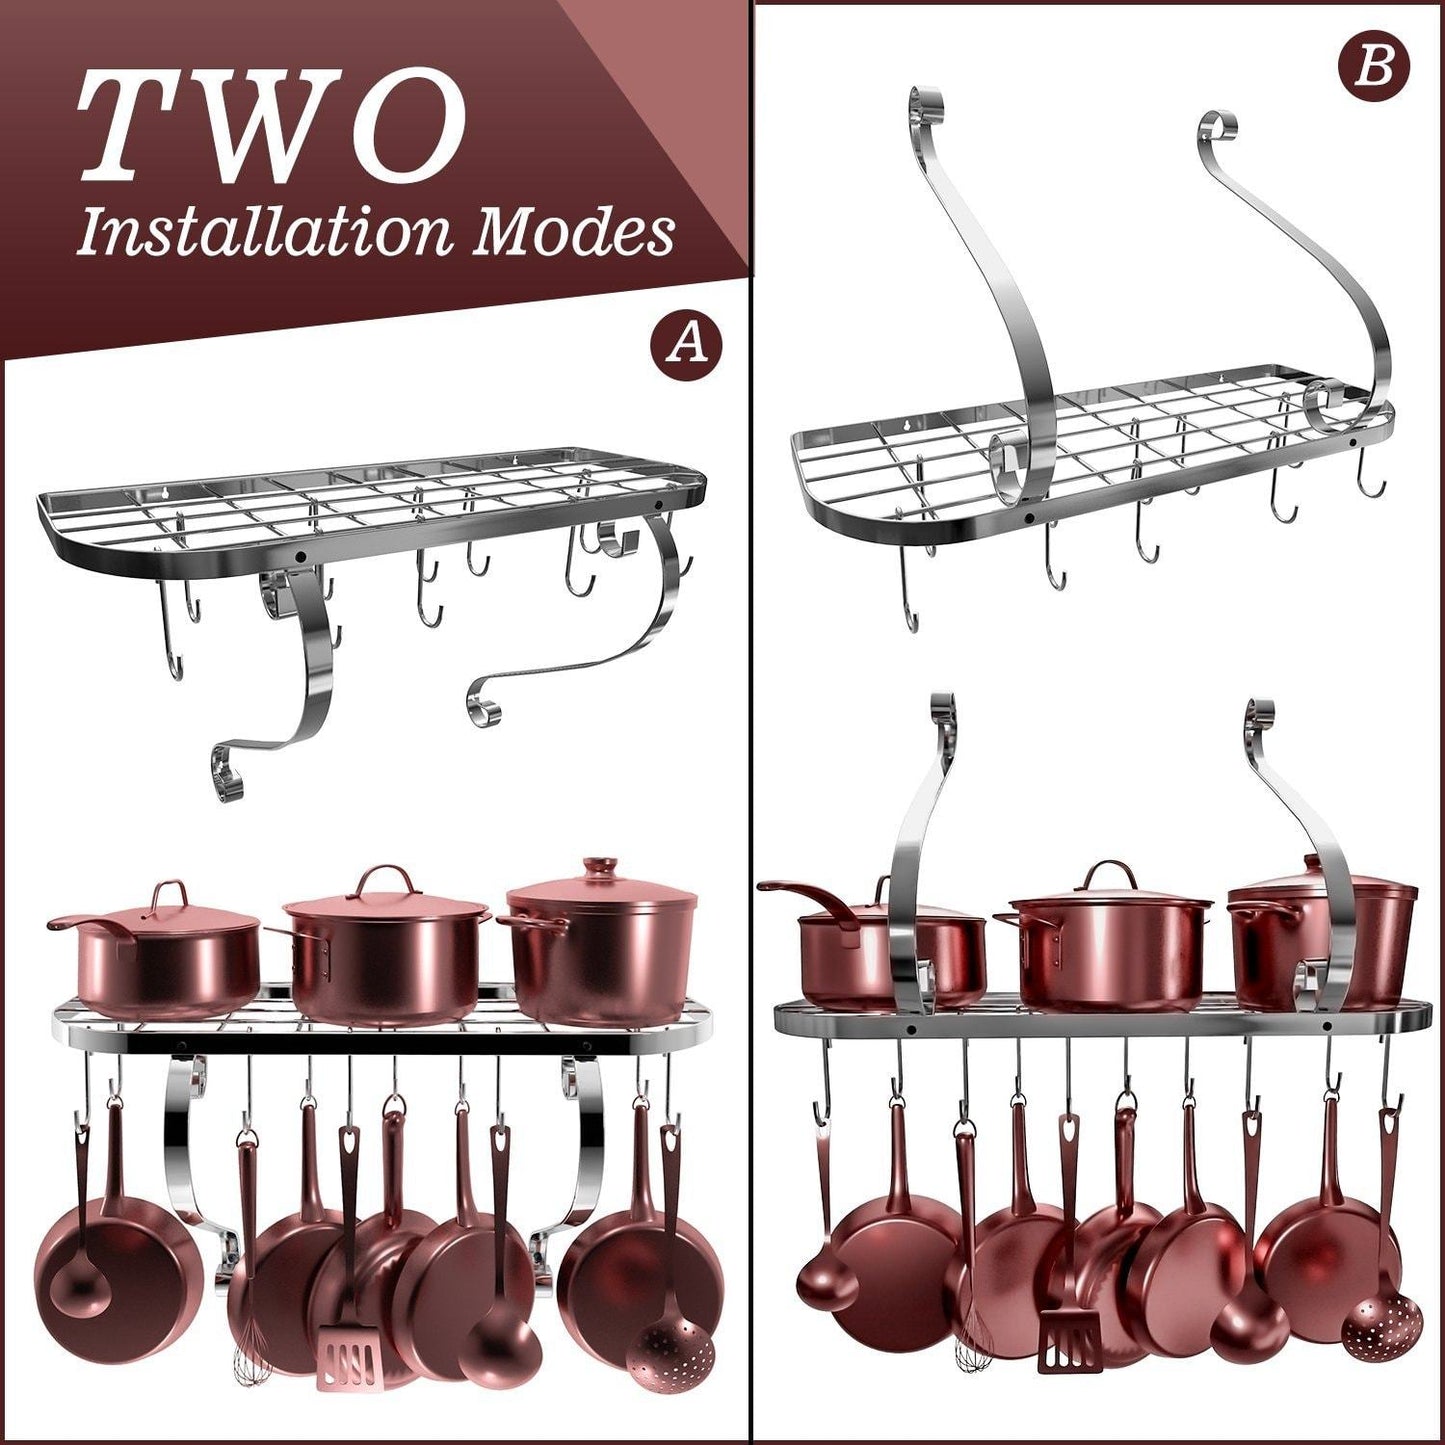 Home vdomus square grid wall mount pot rack bookshelf rack with 10 hooks kitchen cookware 24 by 10 inch sliver